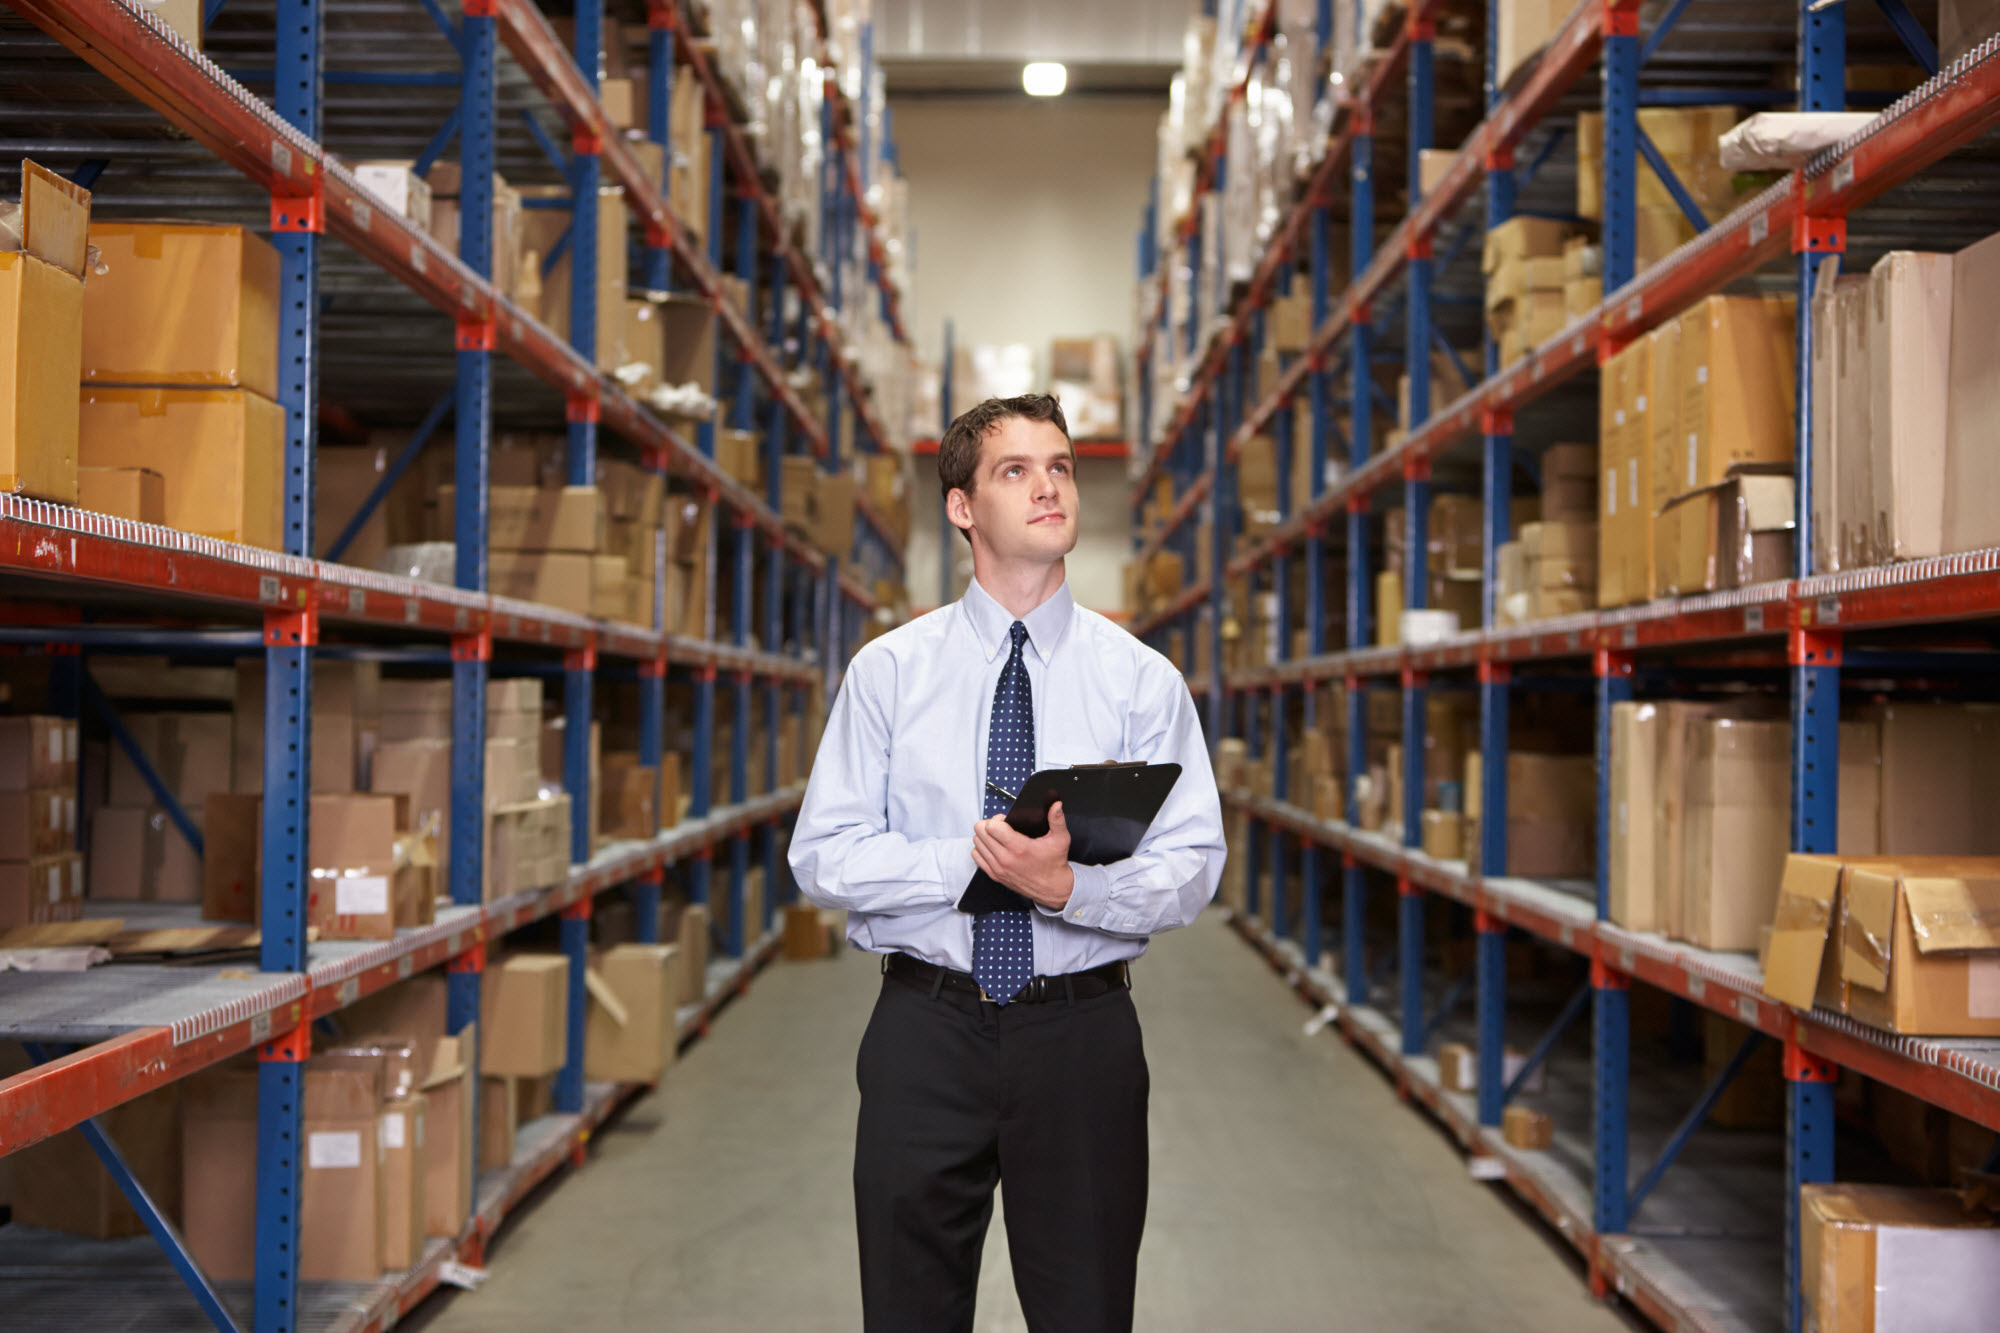 Warehouse Management System: What is it?